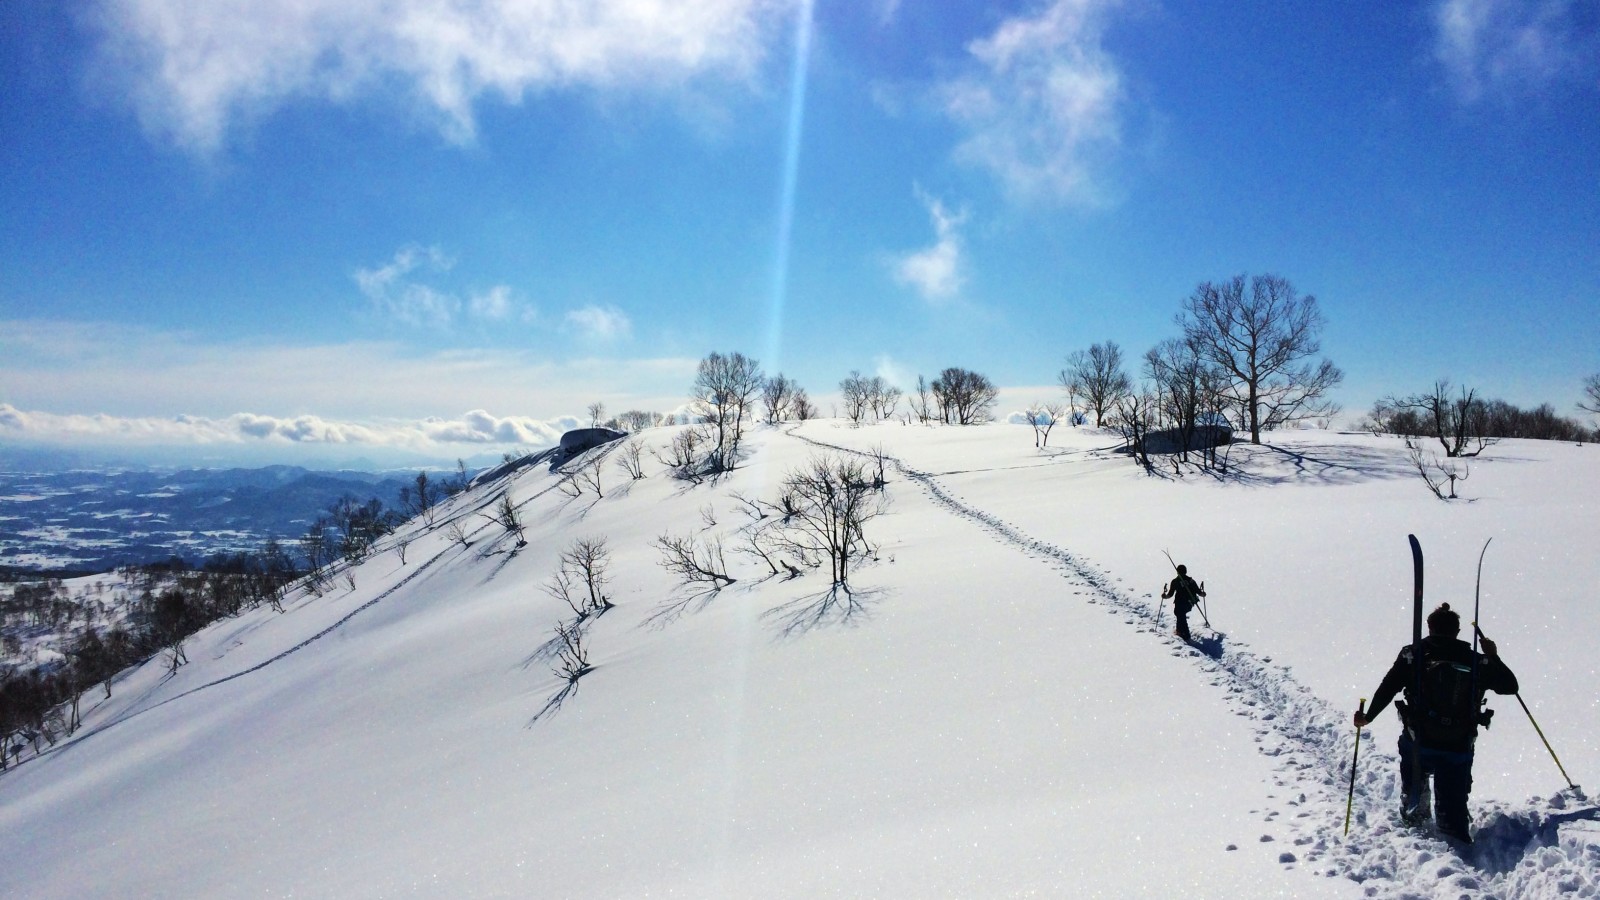 People hiking with skis on snow-covered mountain during daytime